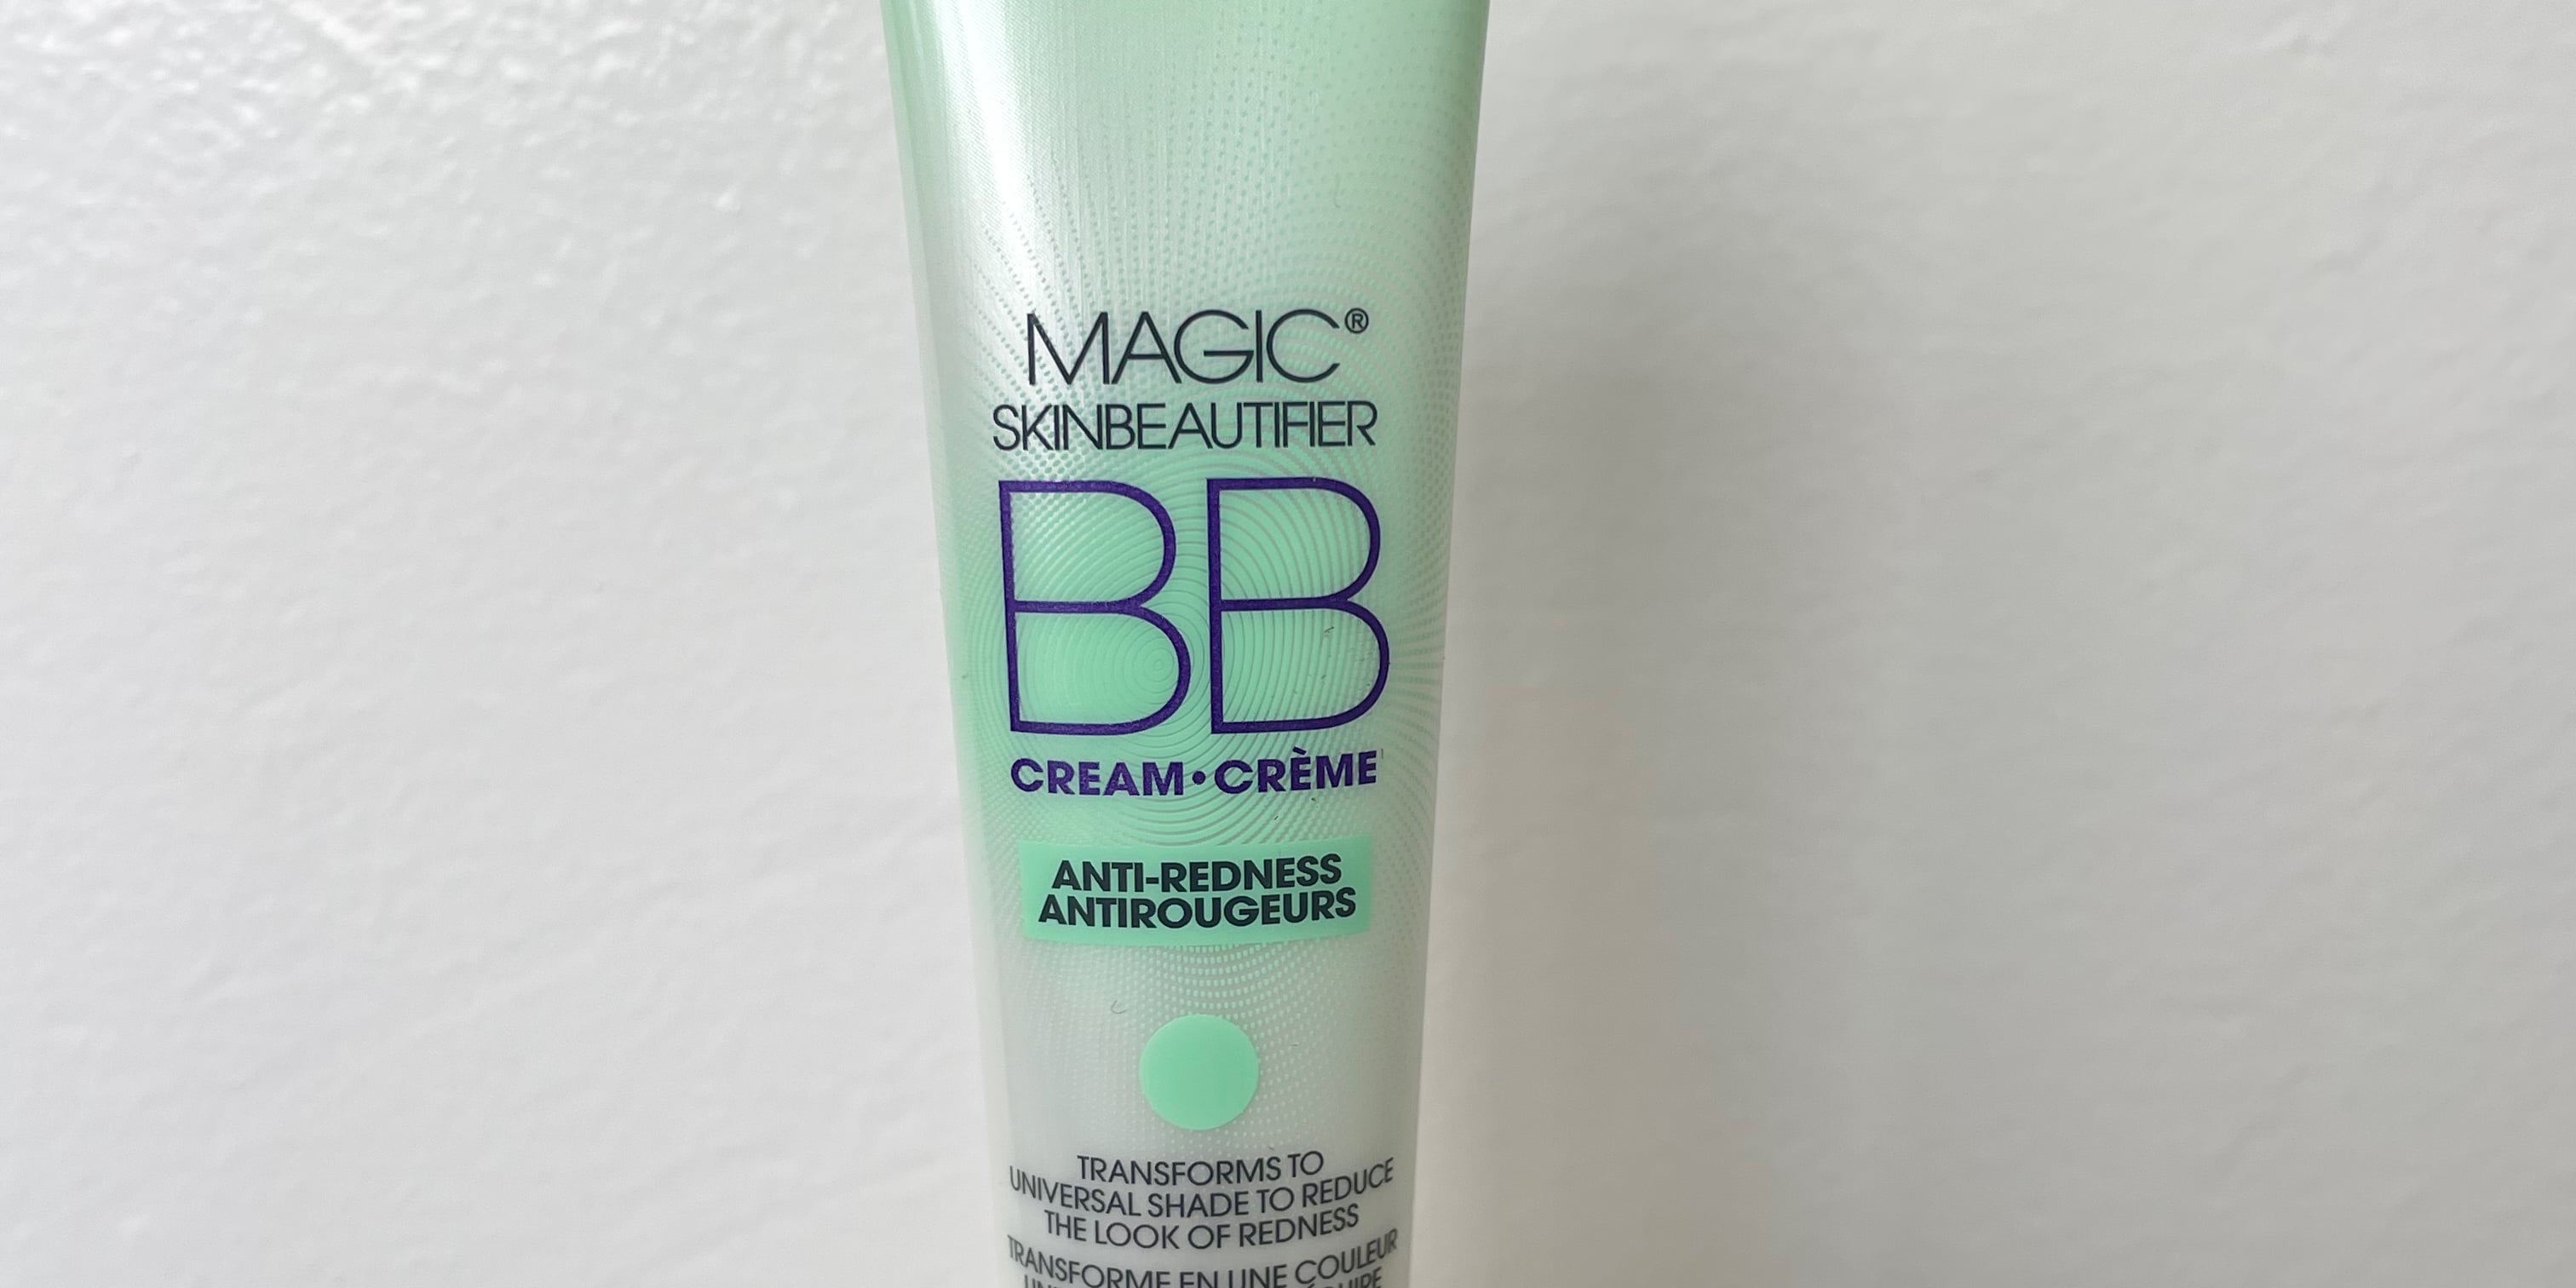 L'Oreal Magic Skin Beautifier BB Cream in Light, Anti-redness &  Anti-fatigue: Comparison Review and Swatches